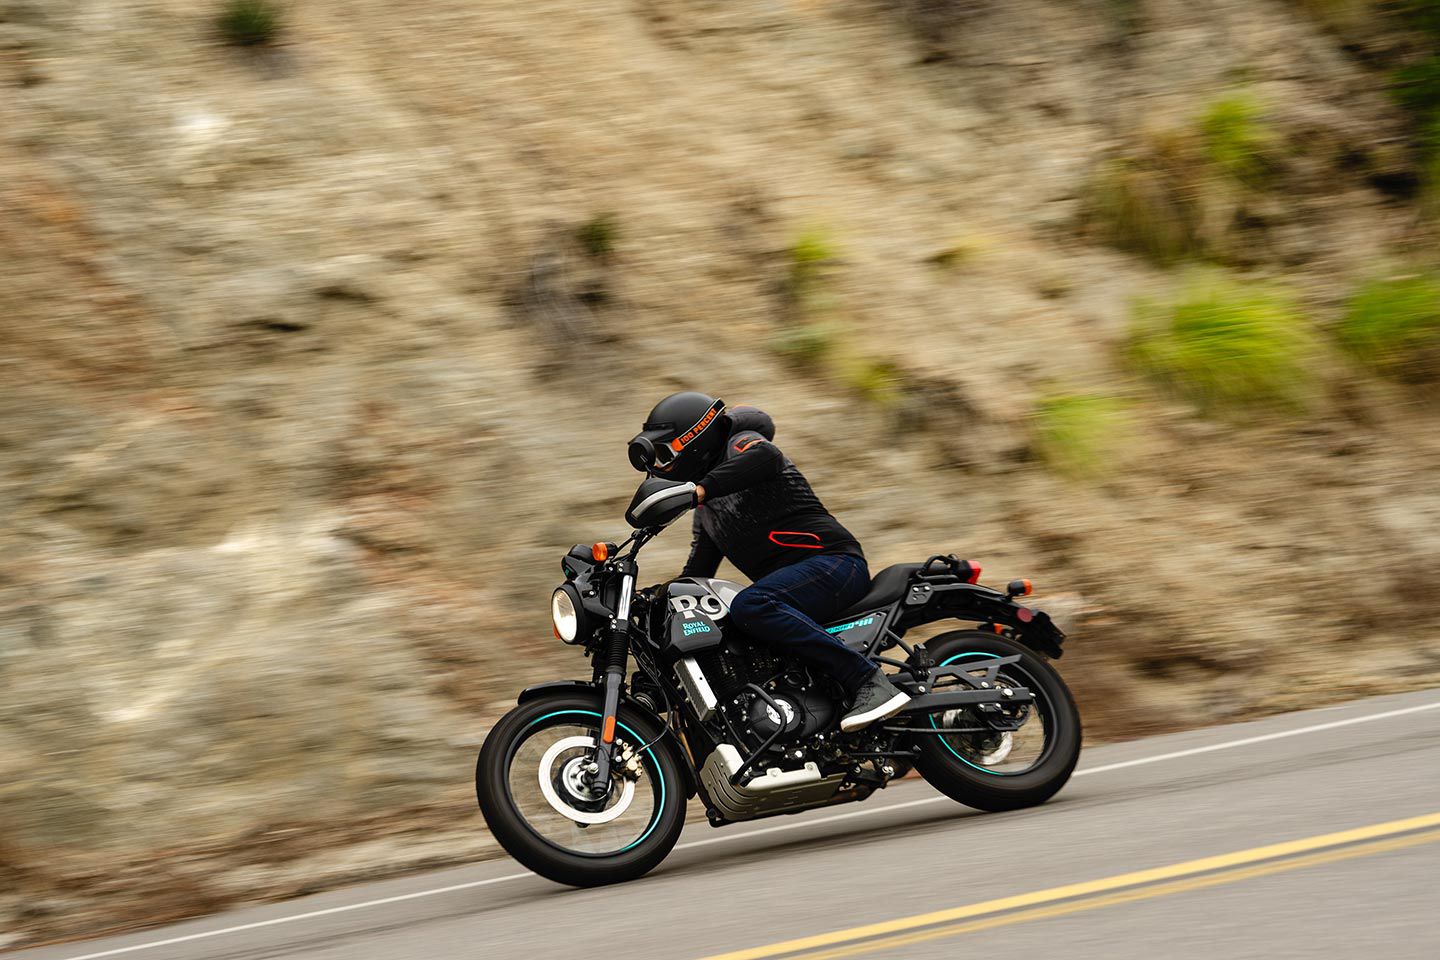 You certainly feel engine vibration through the controls but it adds to the experience and nostalgic motorcycling vibe.